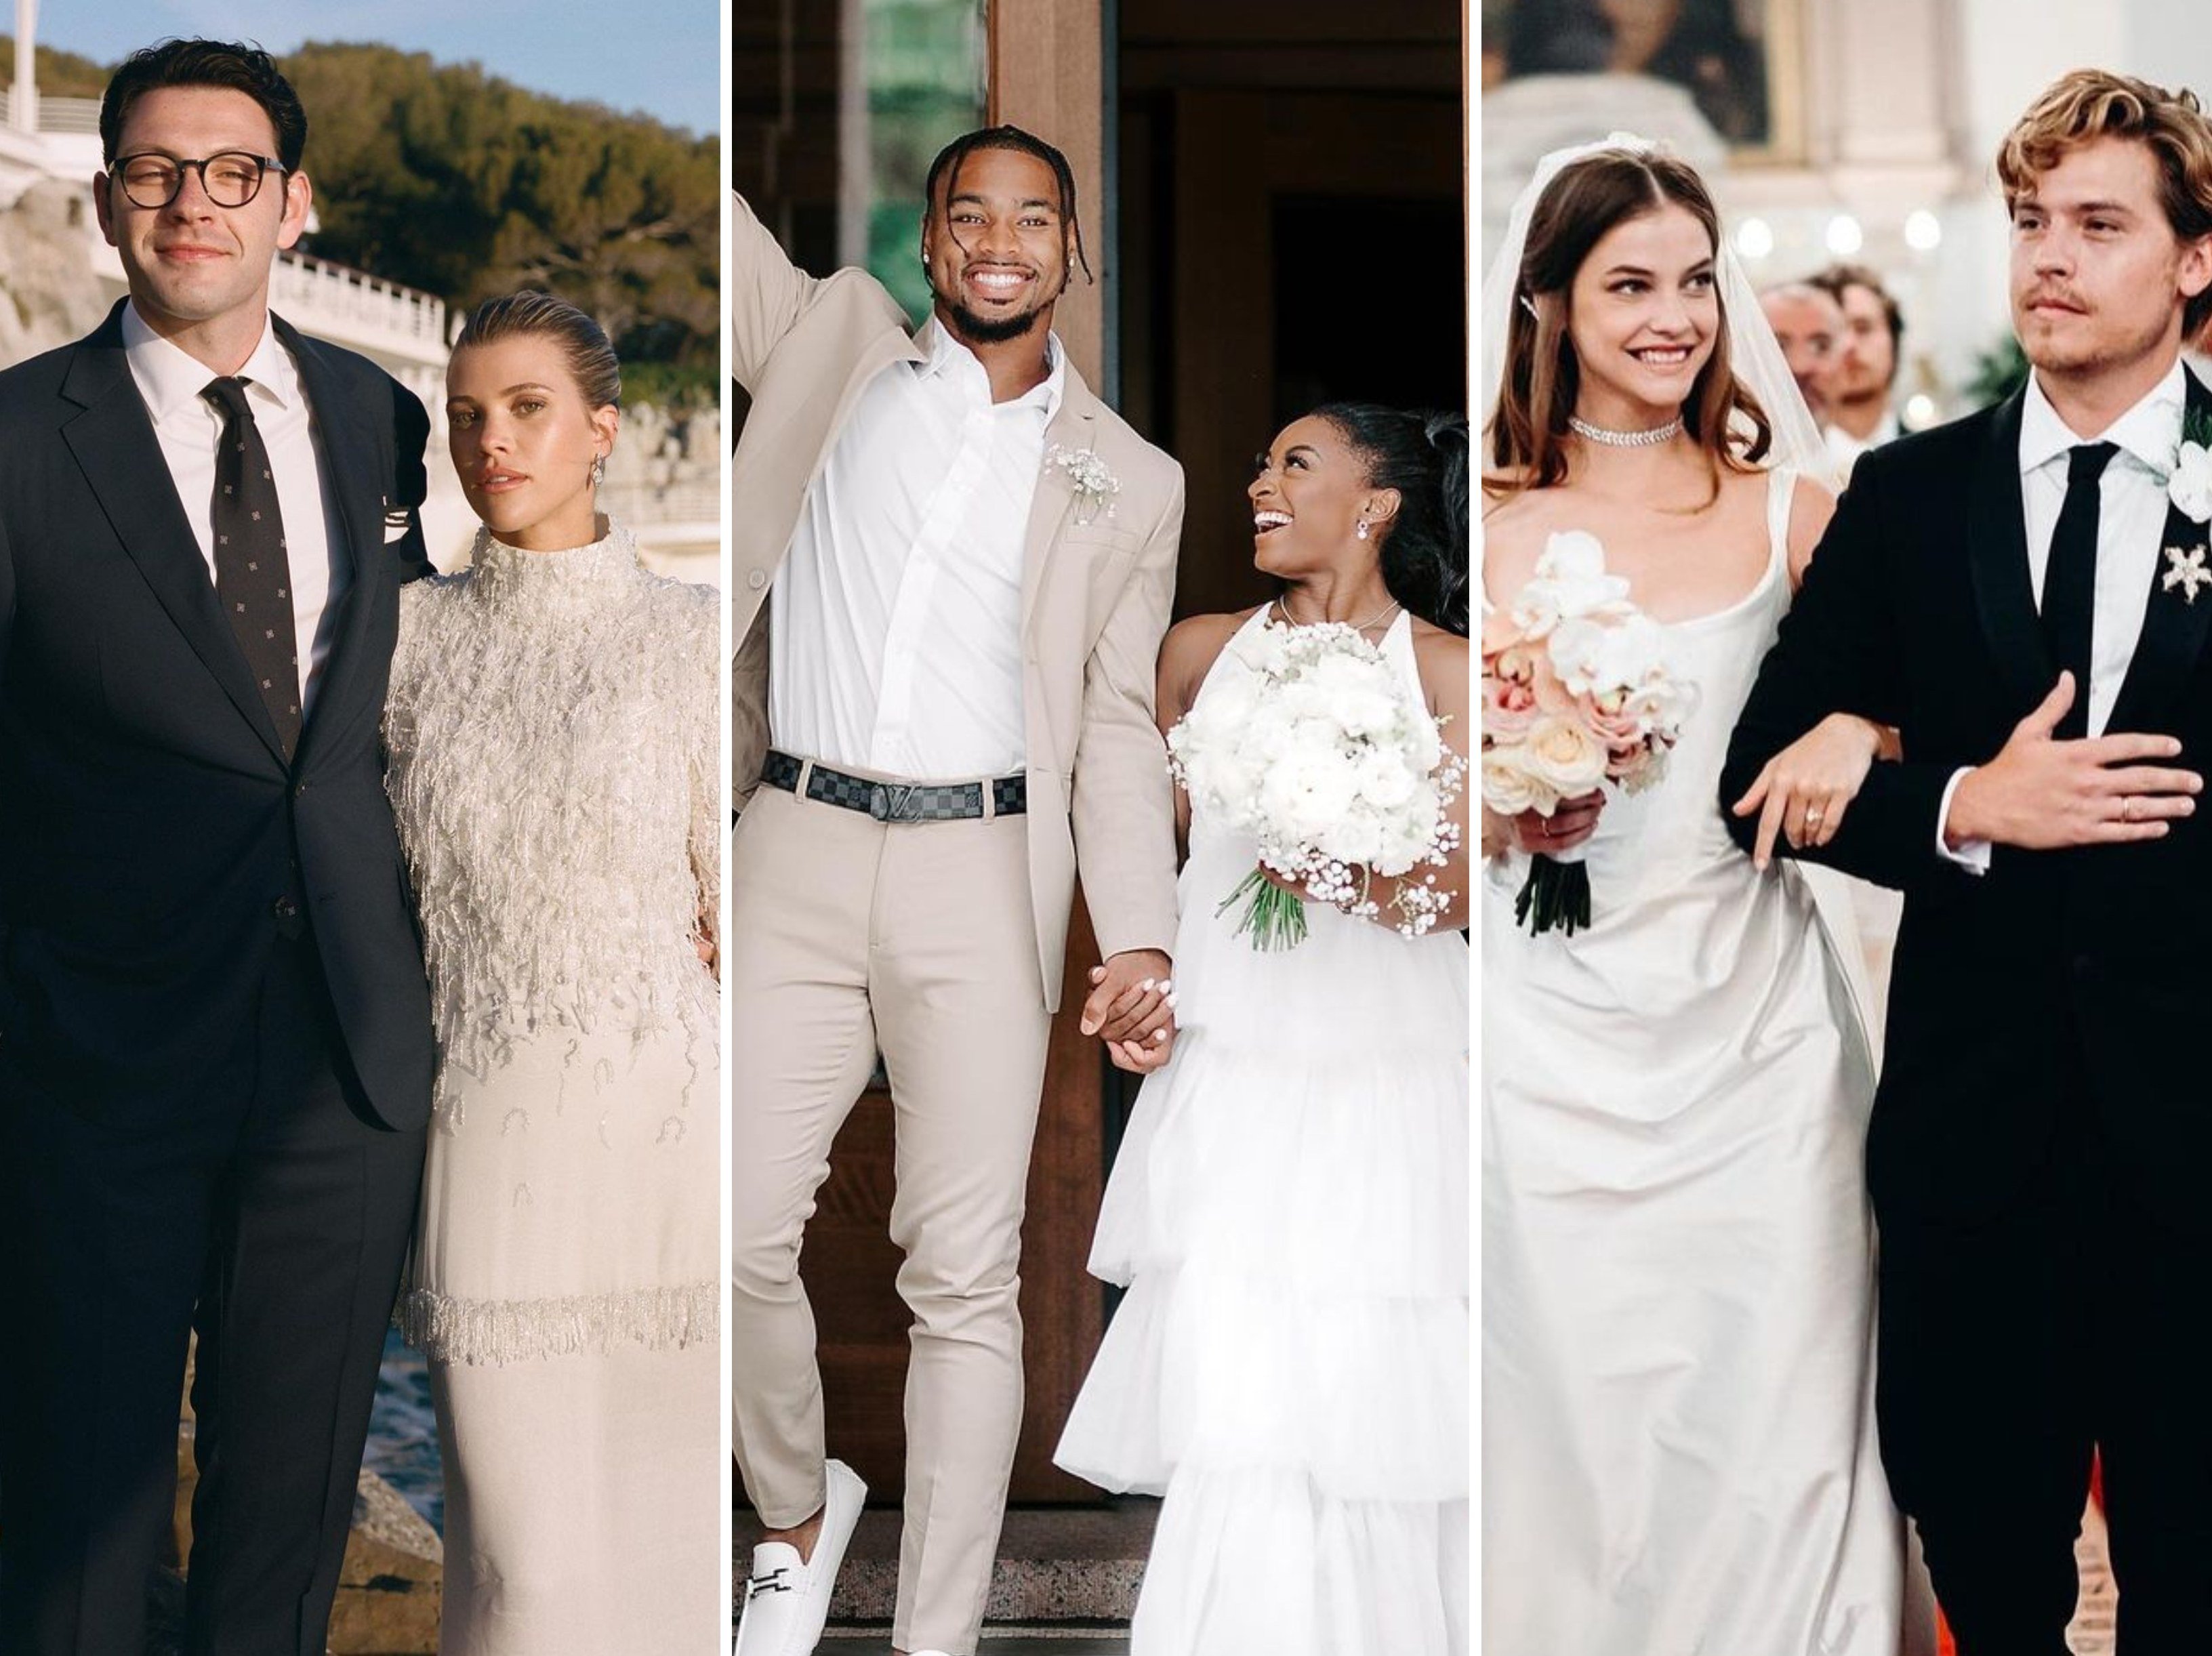 Sofia Richie and Elliot Grainge, Simone Biles and Jonathan Owens, and Dylan Sprouse and Barbara Palvin are just three celebrity couples who tied the knot this year. Photos: @realbarbarapalvin, @simonebiles, @sofiarichiegrainge/Instagram